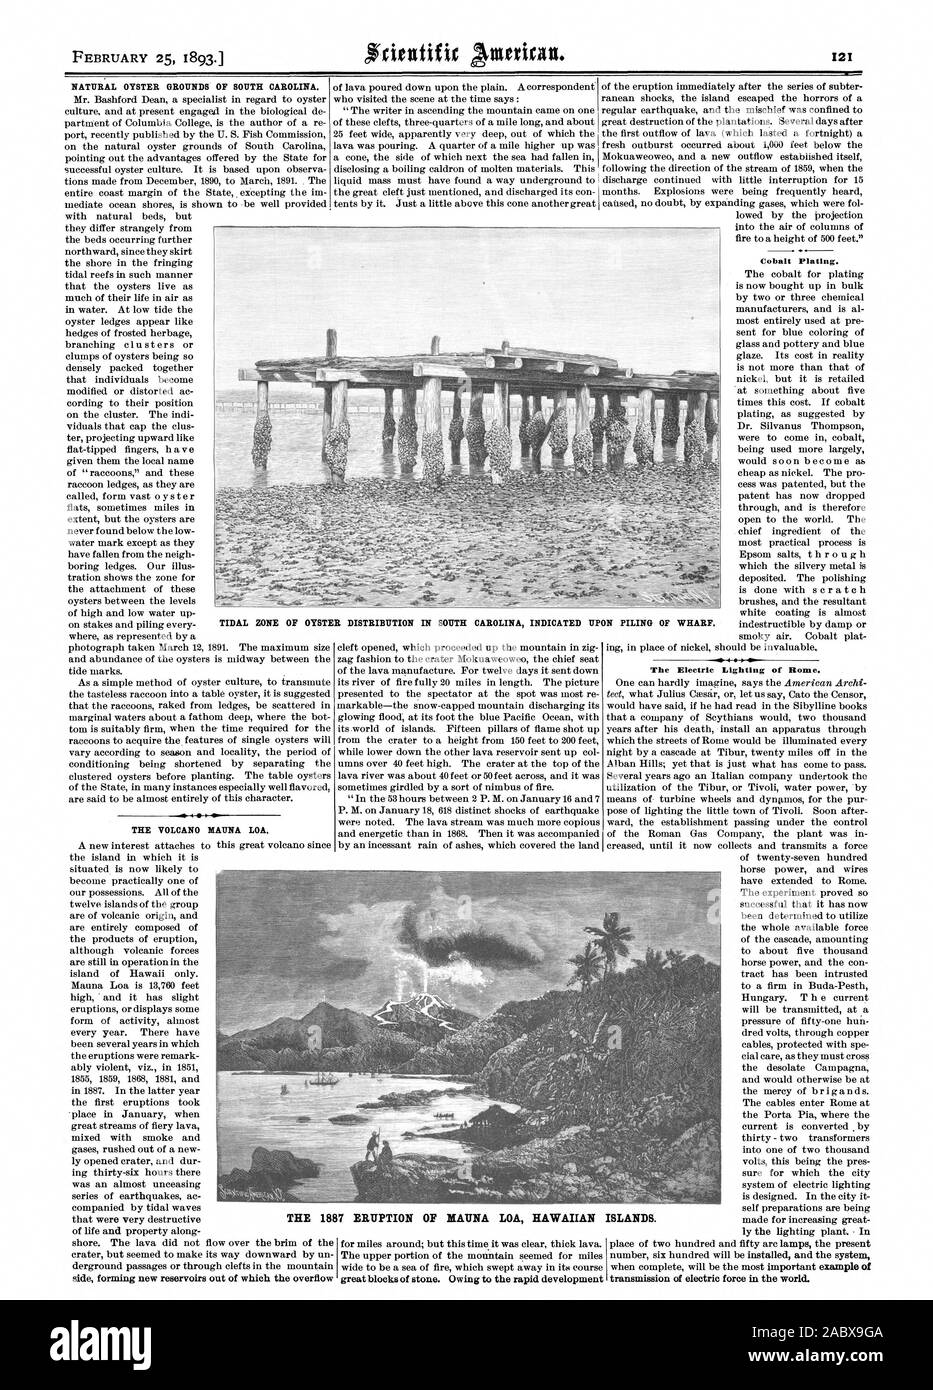 NATURAL OYSTER GROUNDS OF SOUTH CAROLINA. THE VOLCANO MAUNA LOA. Cobalt Plating. The Electric Lighting of Rome. transmission of electric force in the world. TIDAL ZONE OF OYSTER DISTRIBUTION IN SOUTH CAROLINA INDICATED UPON PILING OF WHARF. THE 1887 ERUPTION OF MAUNA LOA HAWAIIAN ISLANDS., scientific american, 1893-02-25 Stock Photo